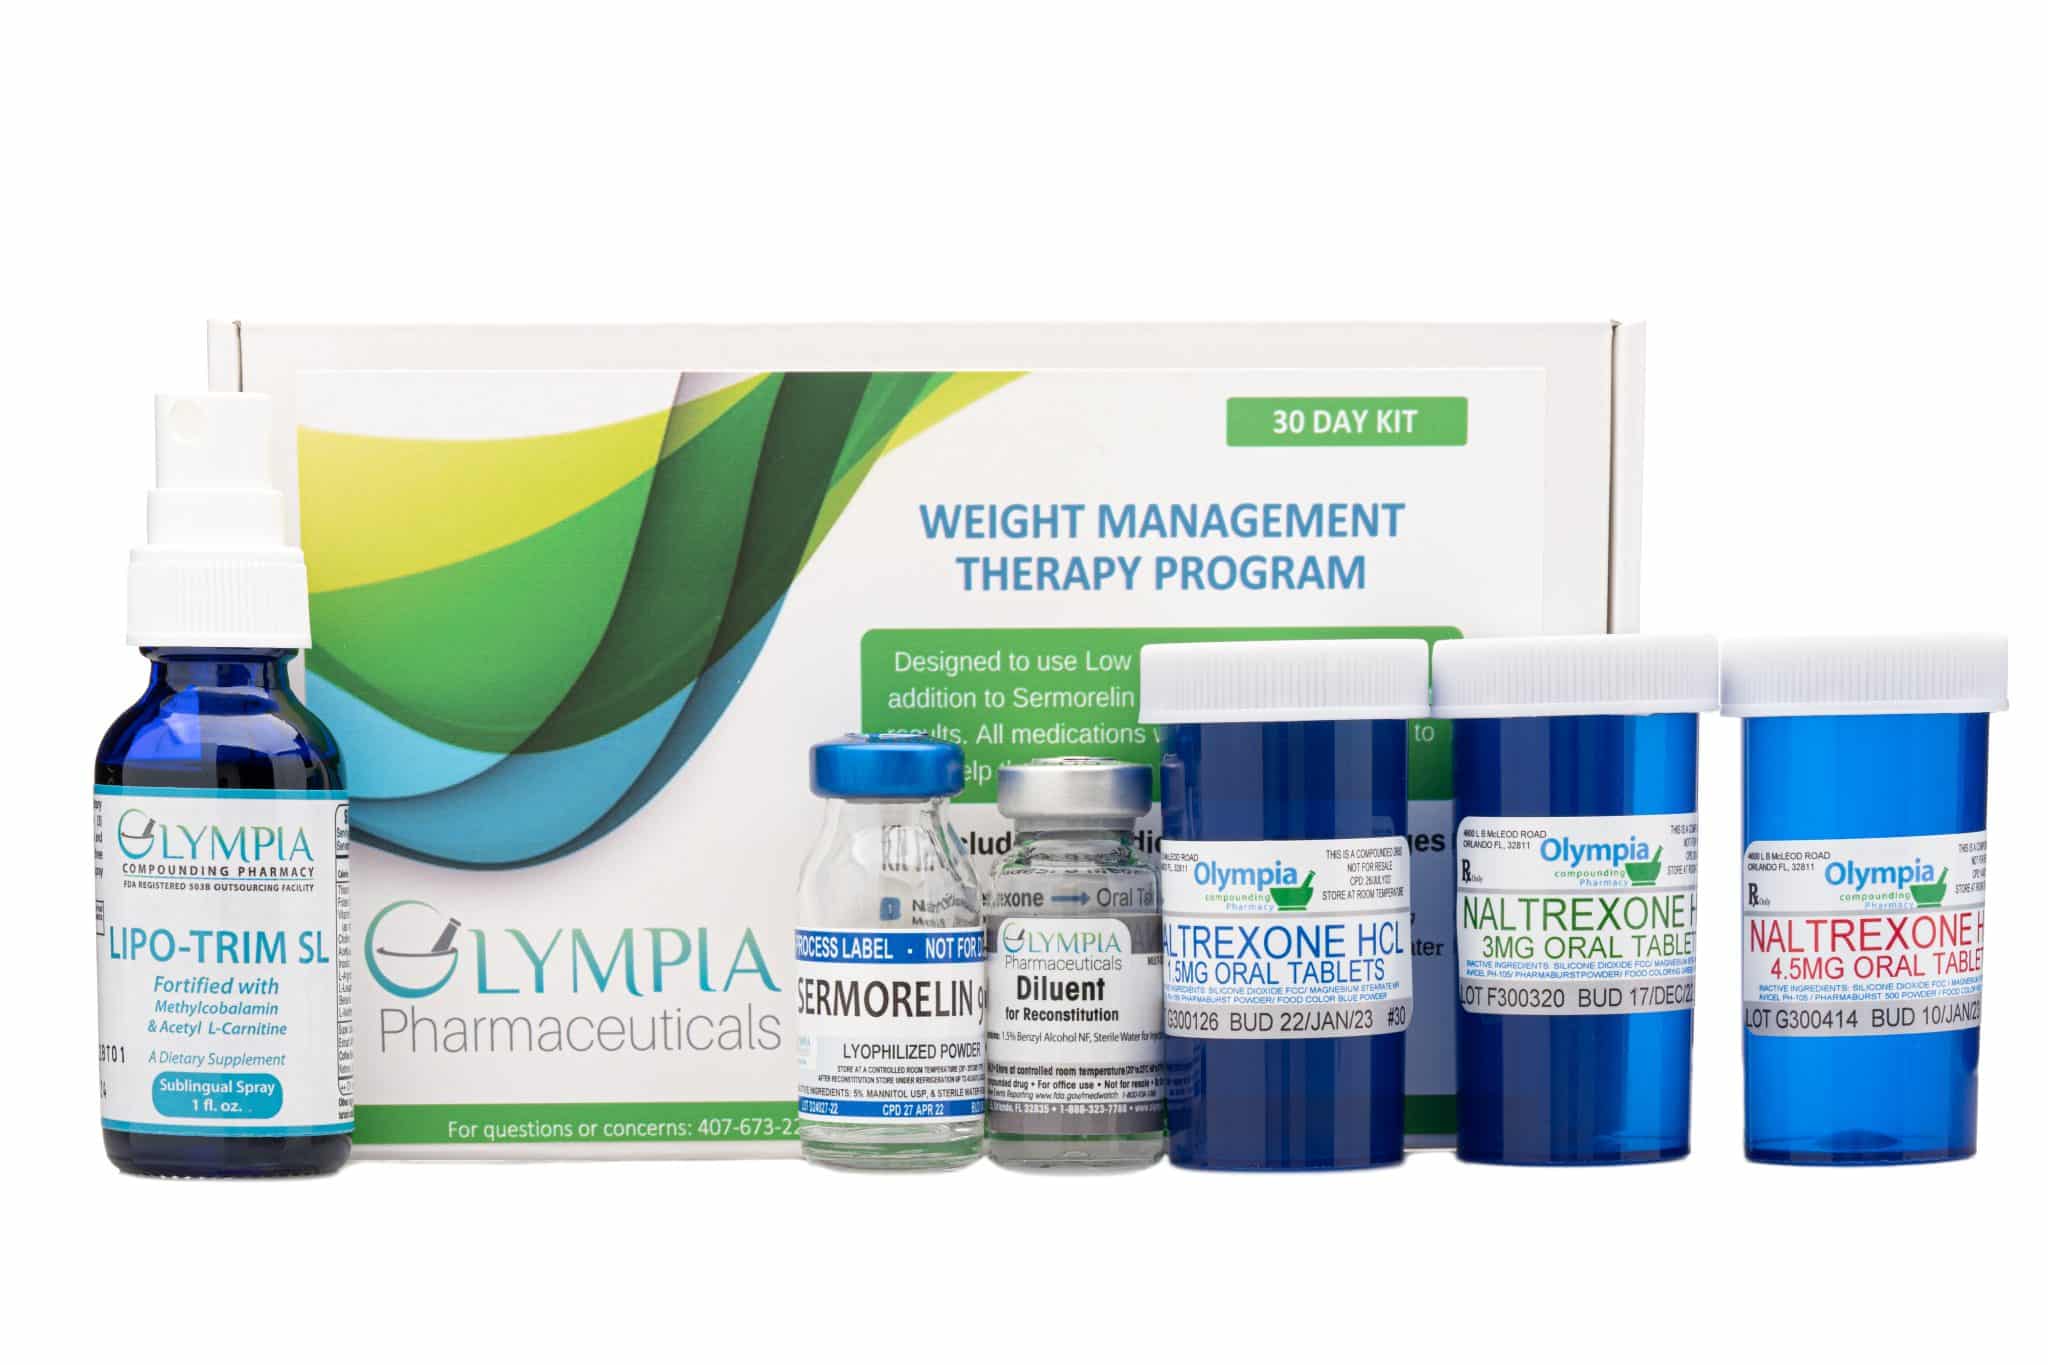 Weight management therapy medications. Hcg alternative.